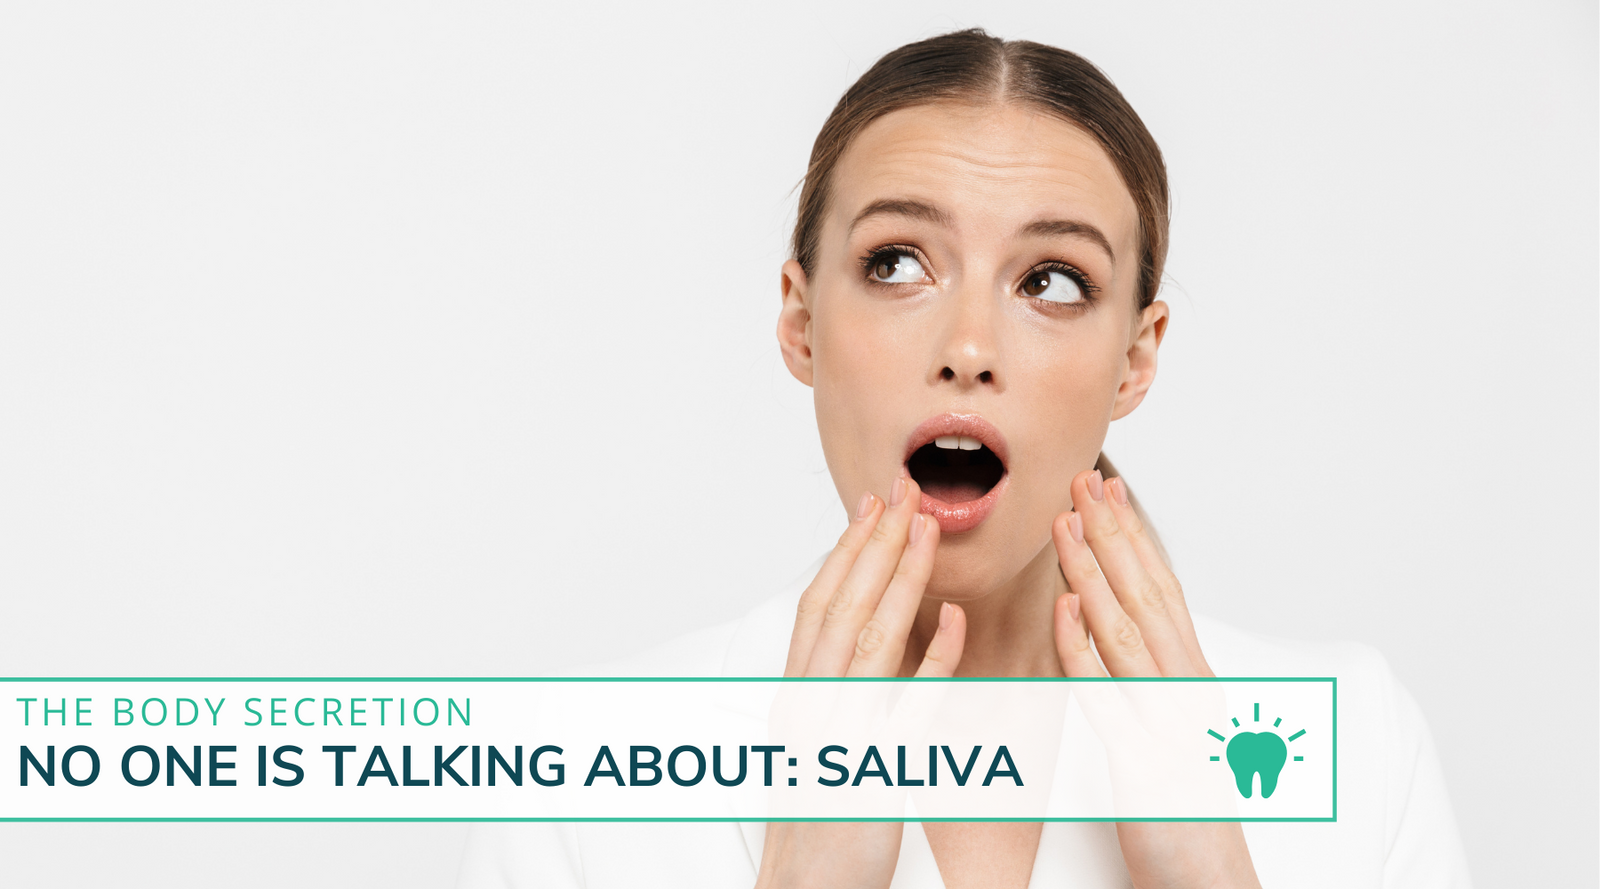 The Body Secretion No One Is Talking About: Saliva